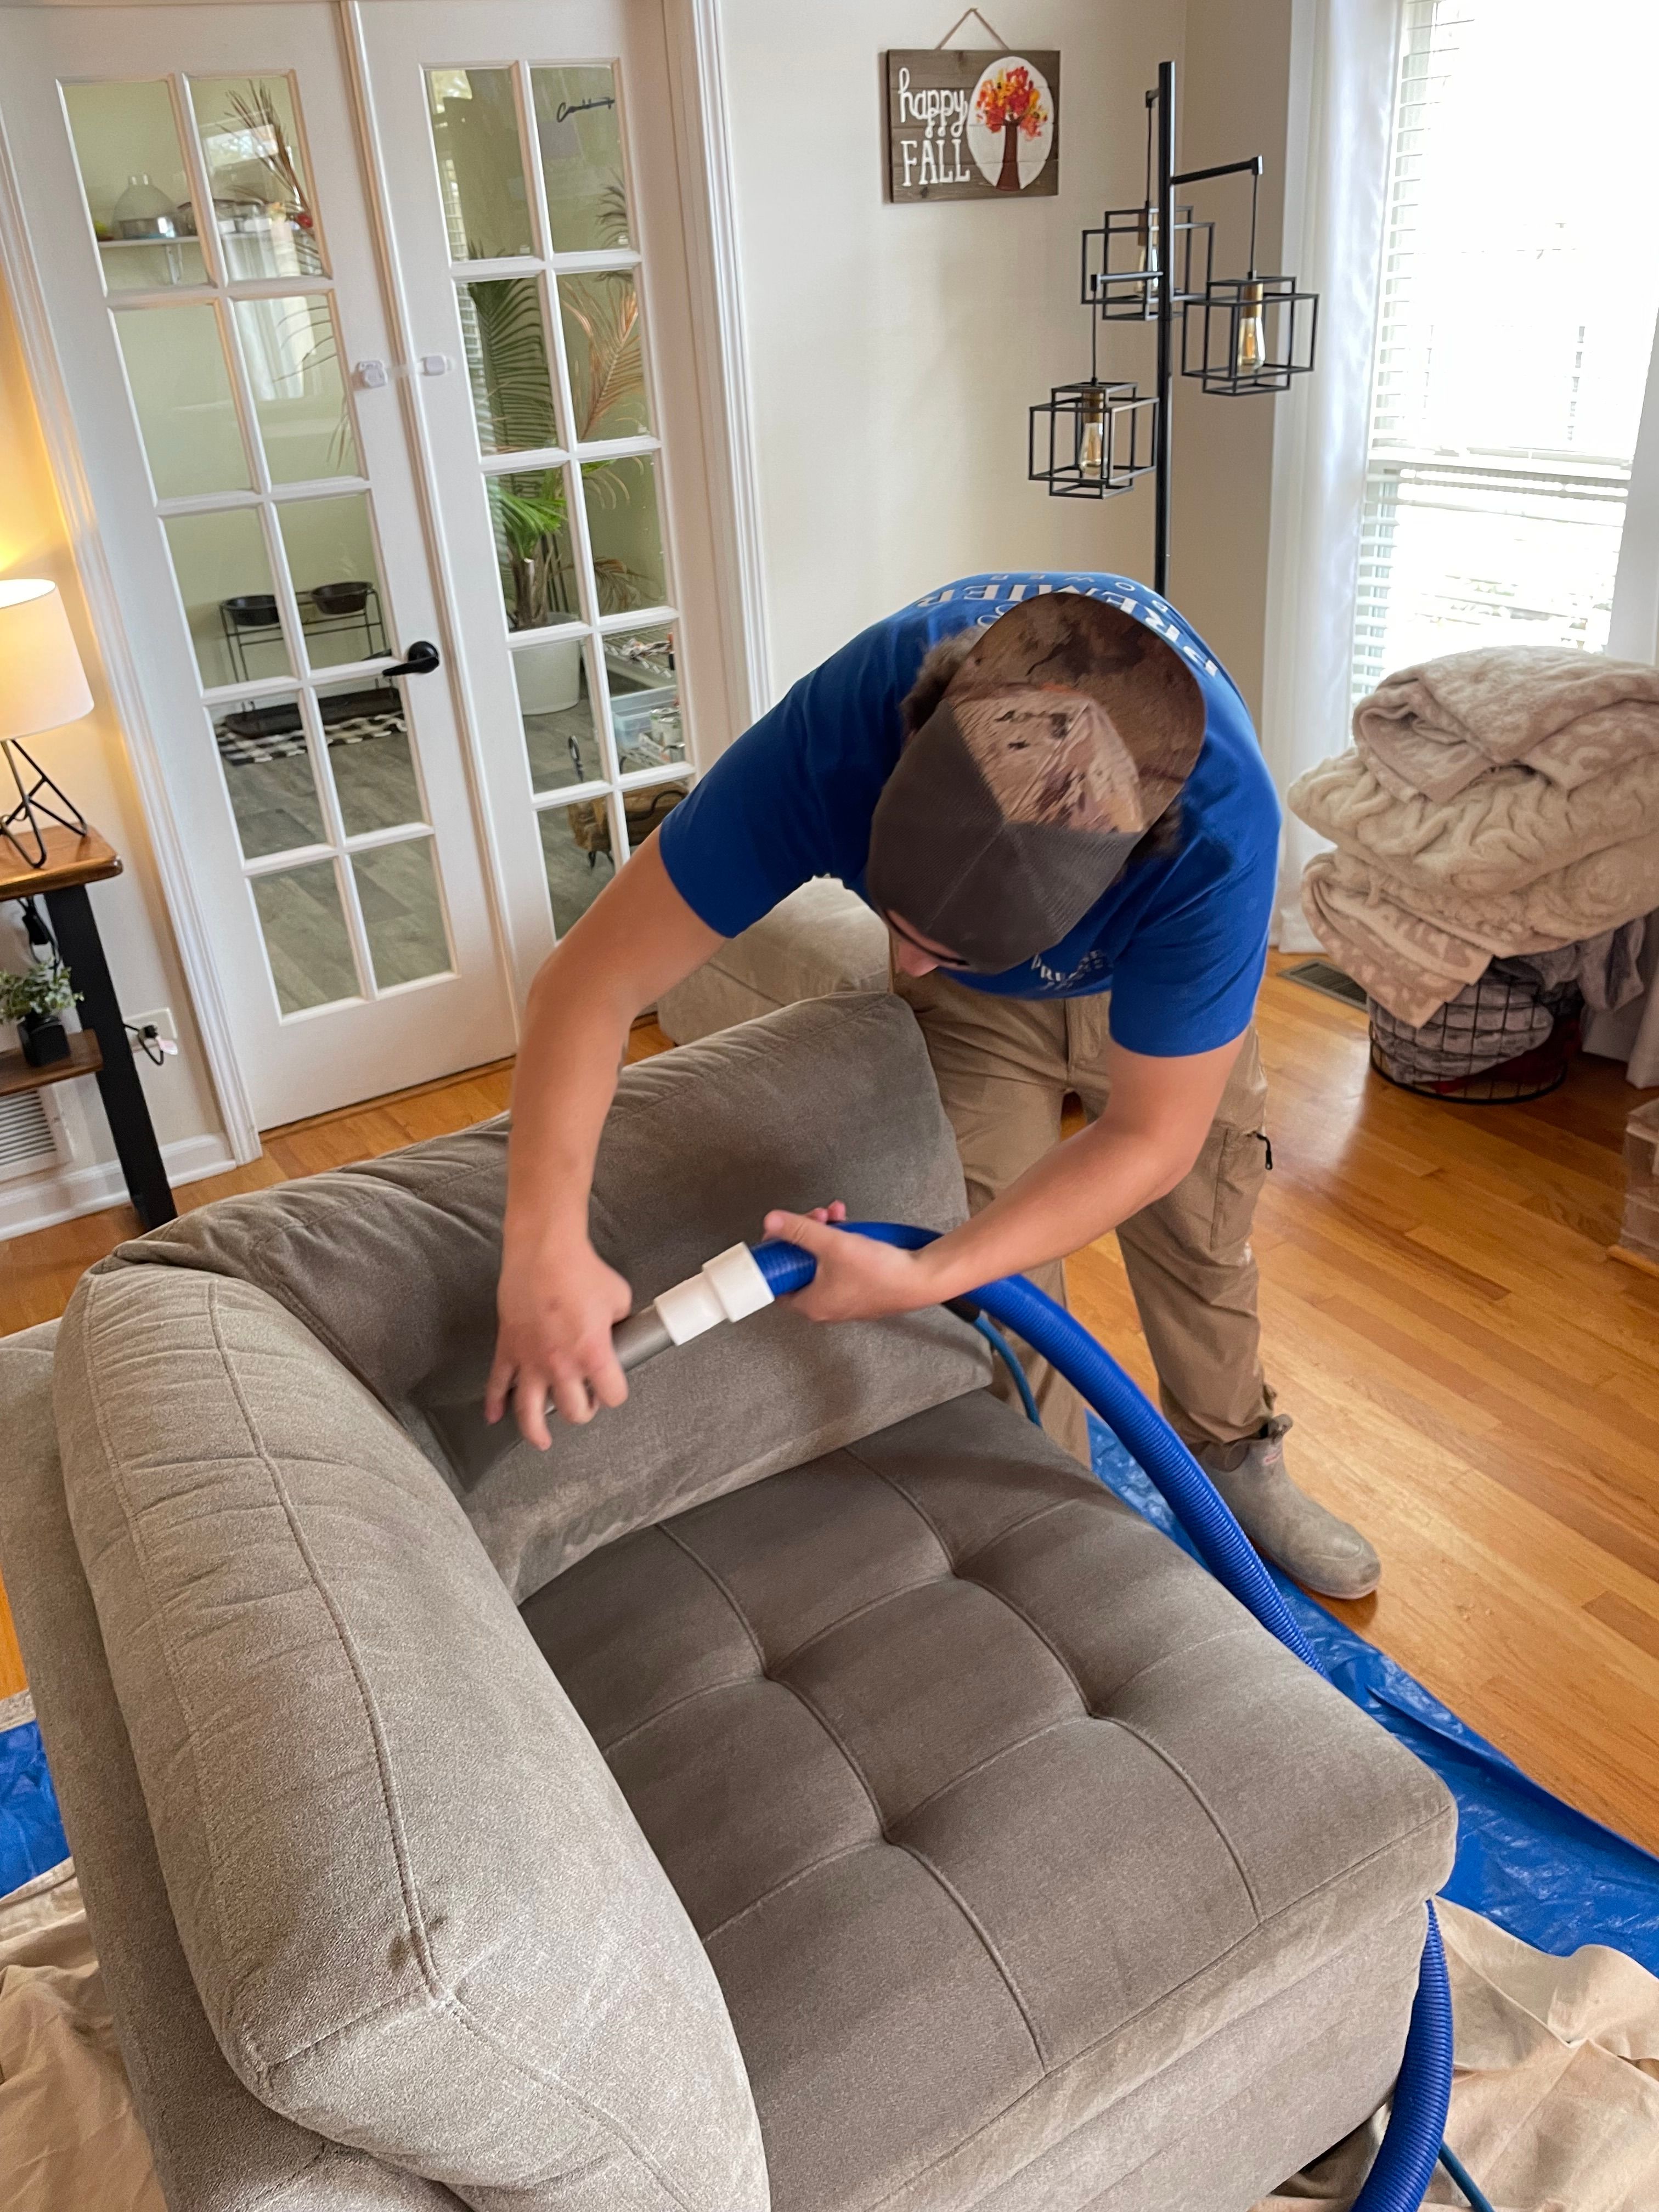 Carpet Cleaning for Premier Partners, LLC. in Volo, IL